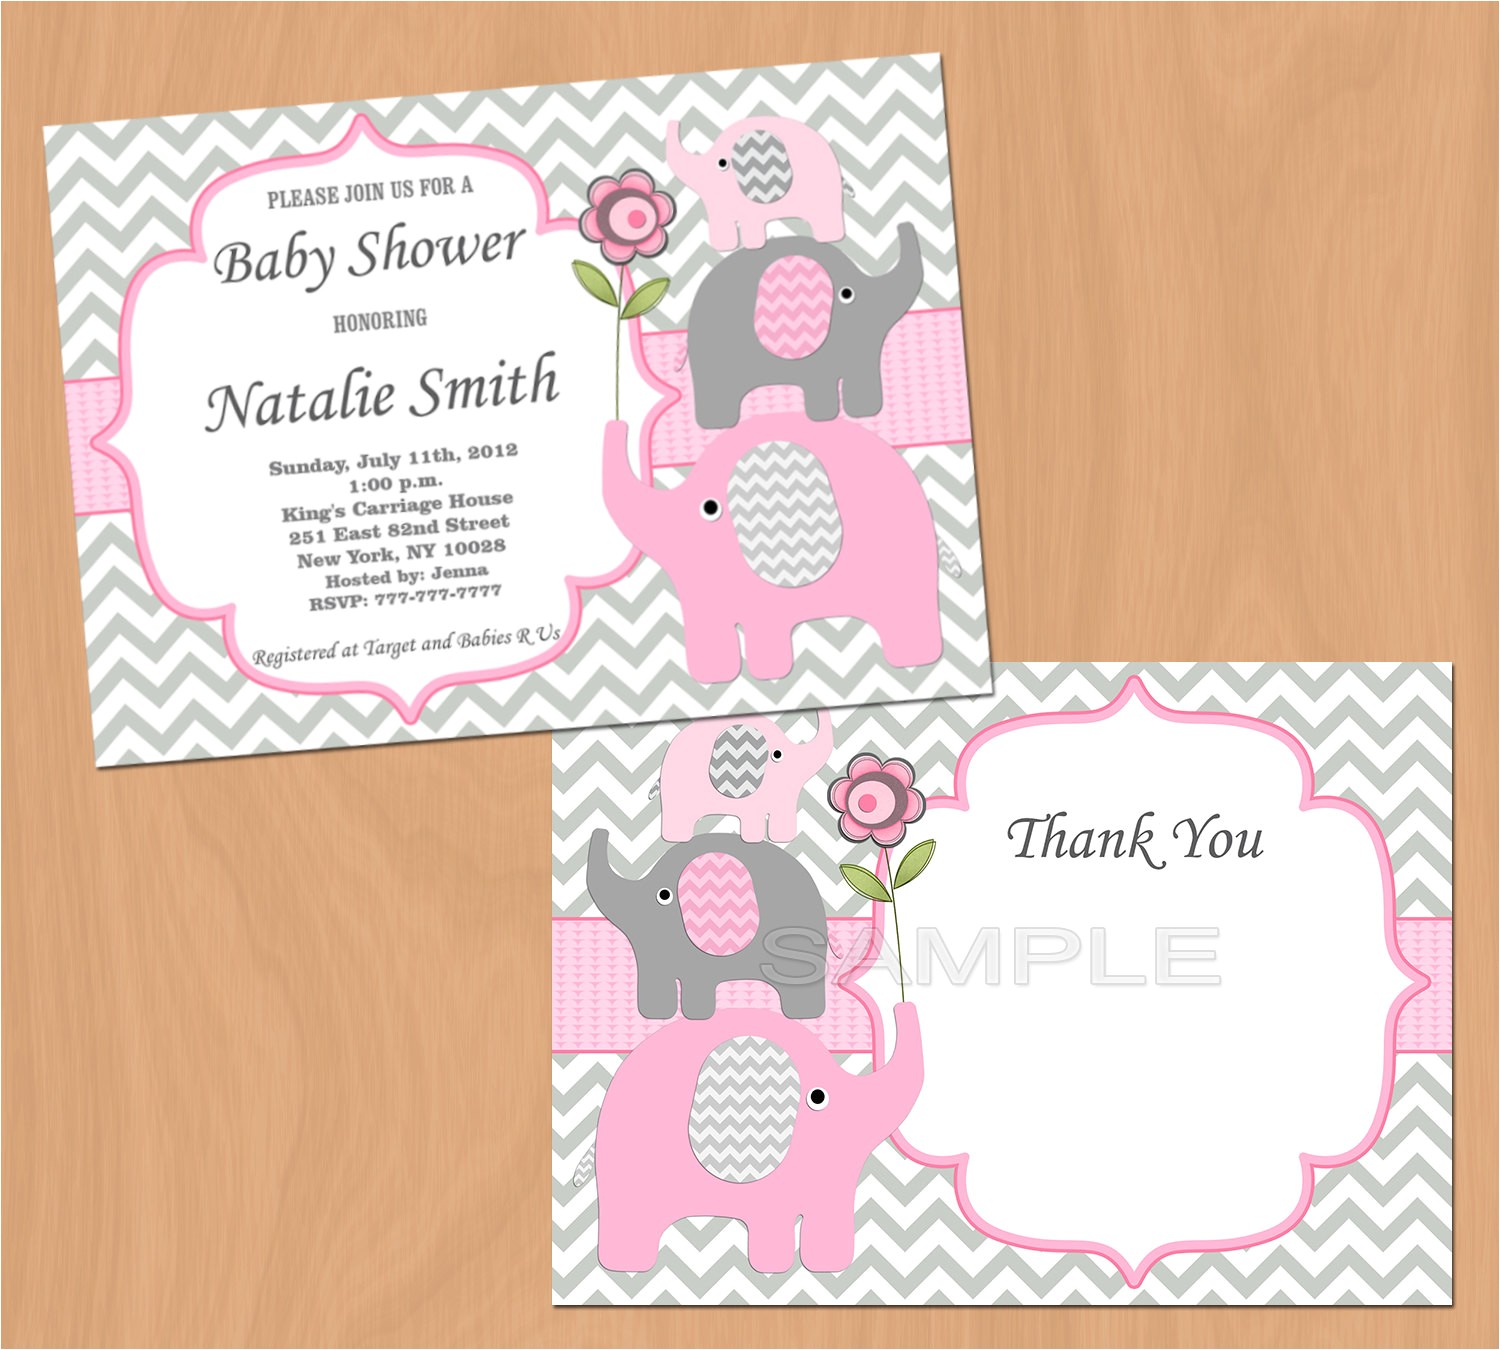 top 11 packs of baby shower invitations trends in 2016